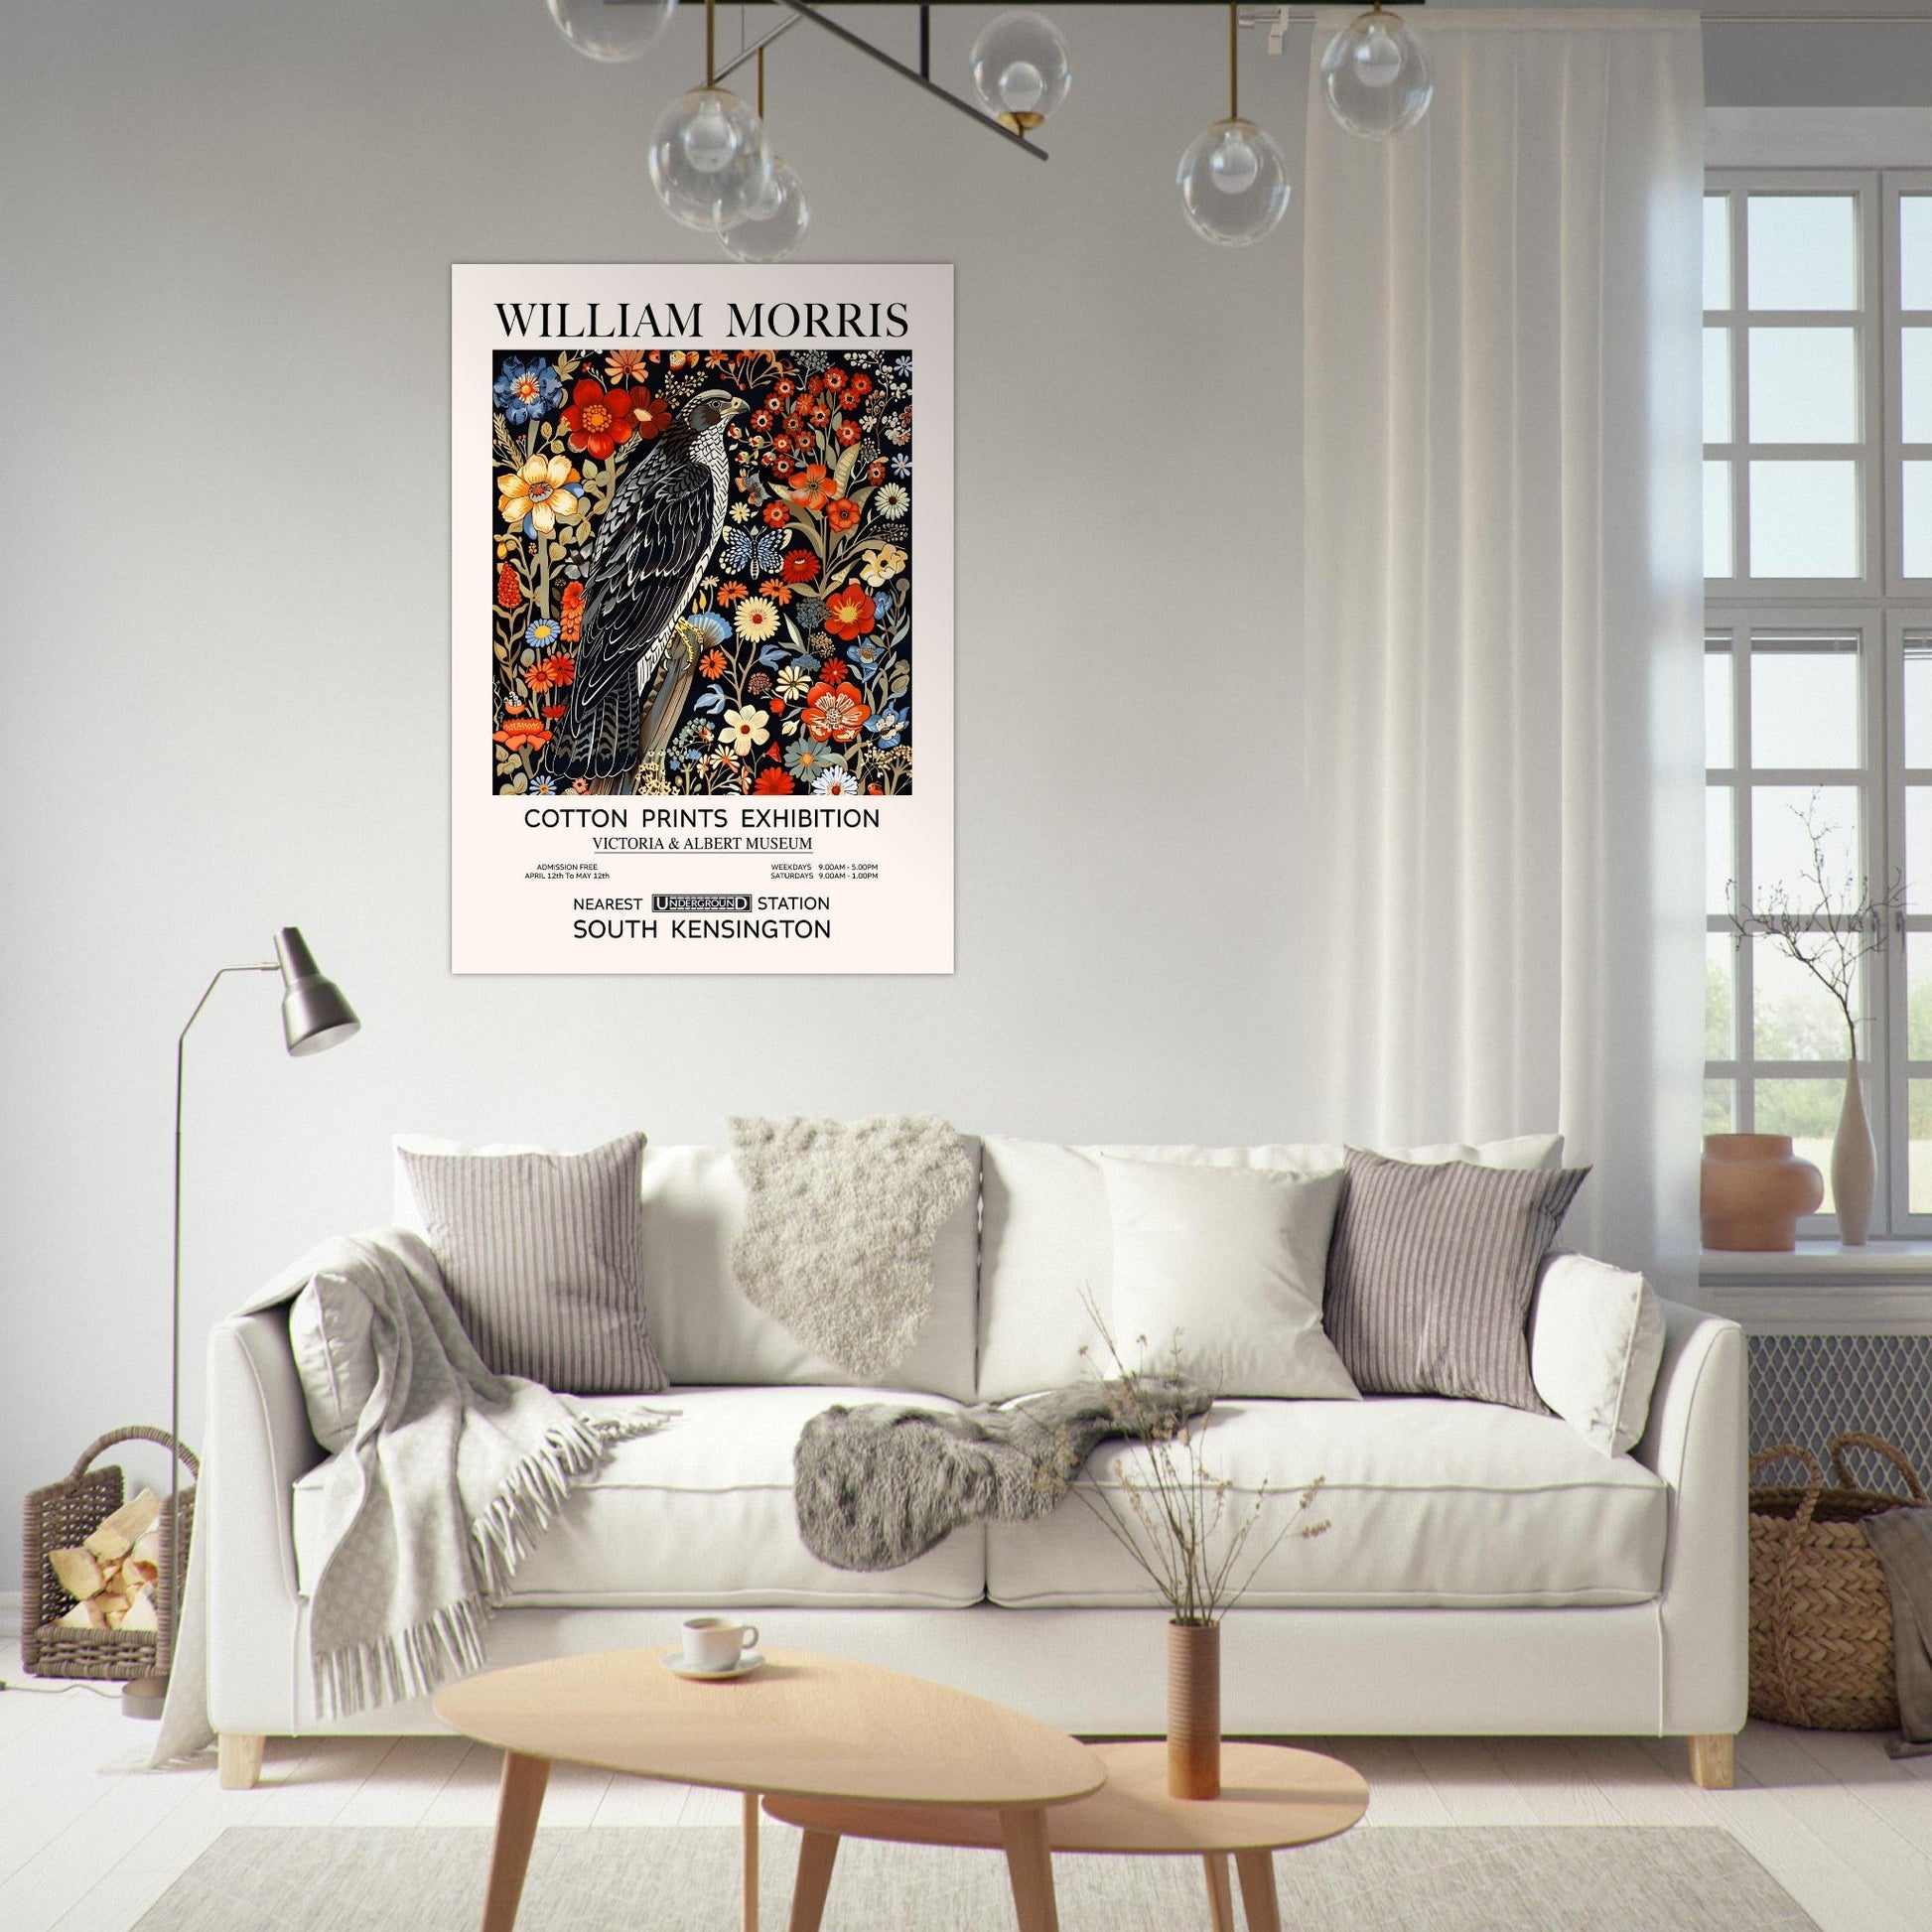 The Falcon And Flowers - William Morris, Falcon, vintage floral art print, william morris, #illieeart